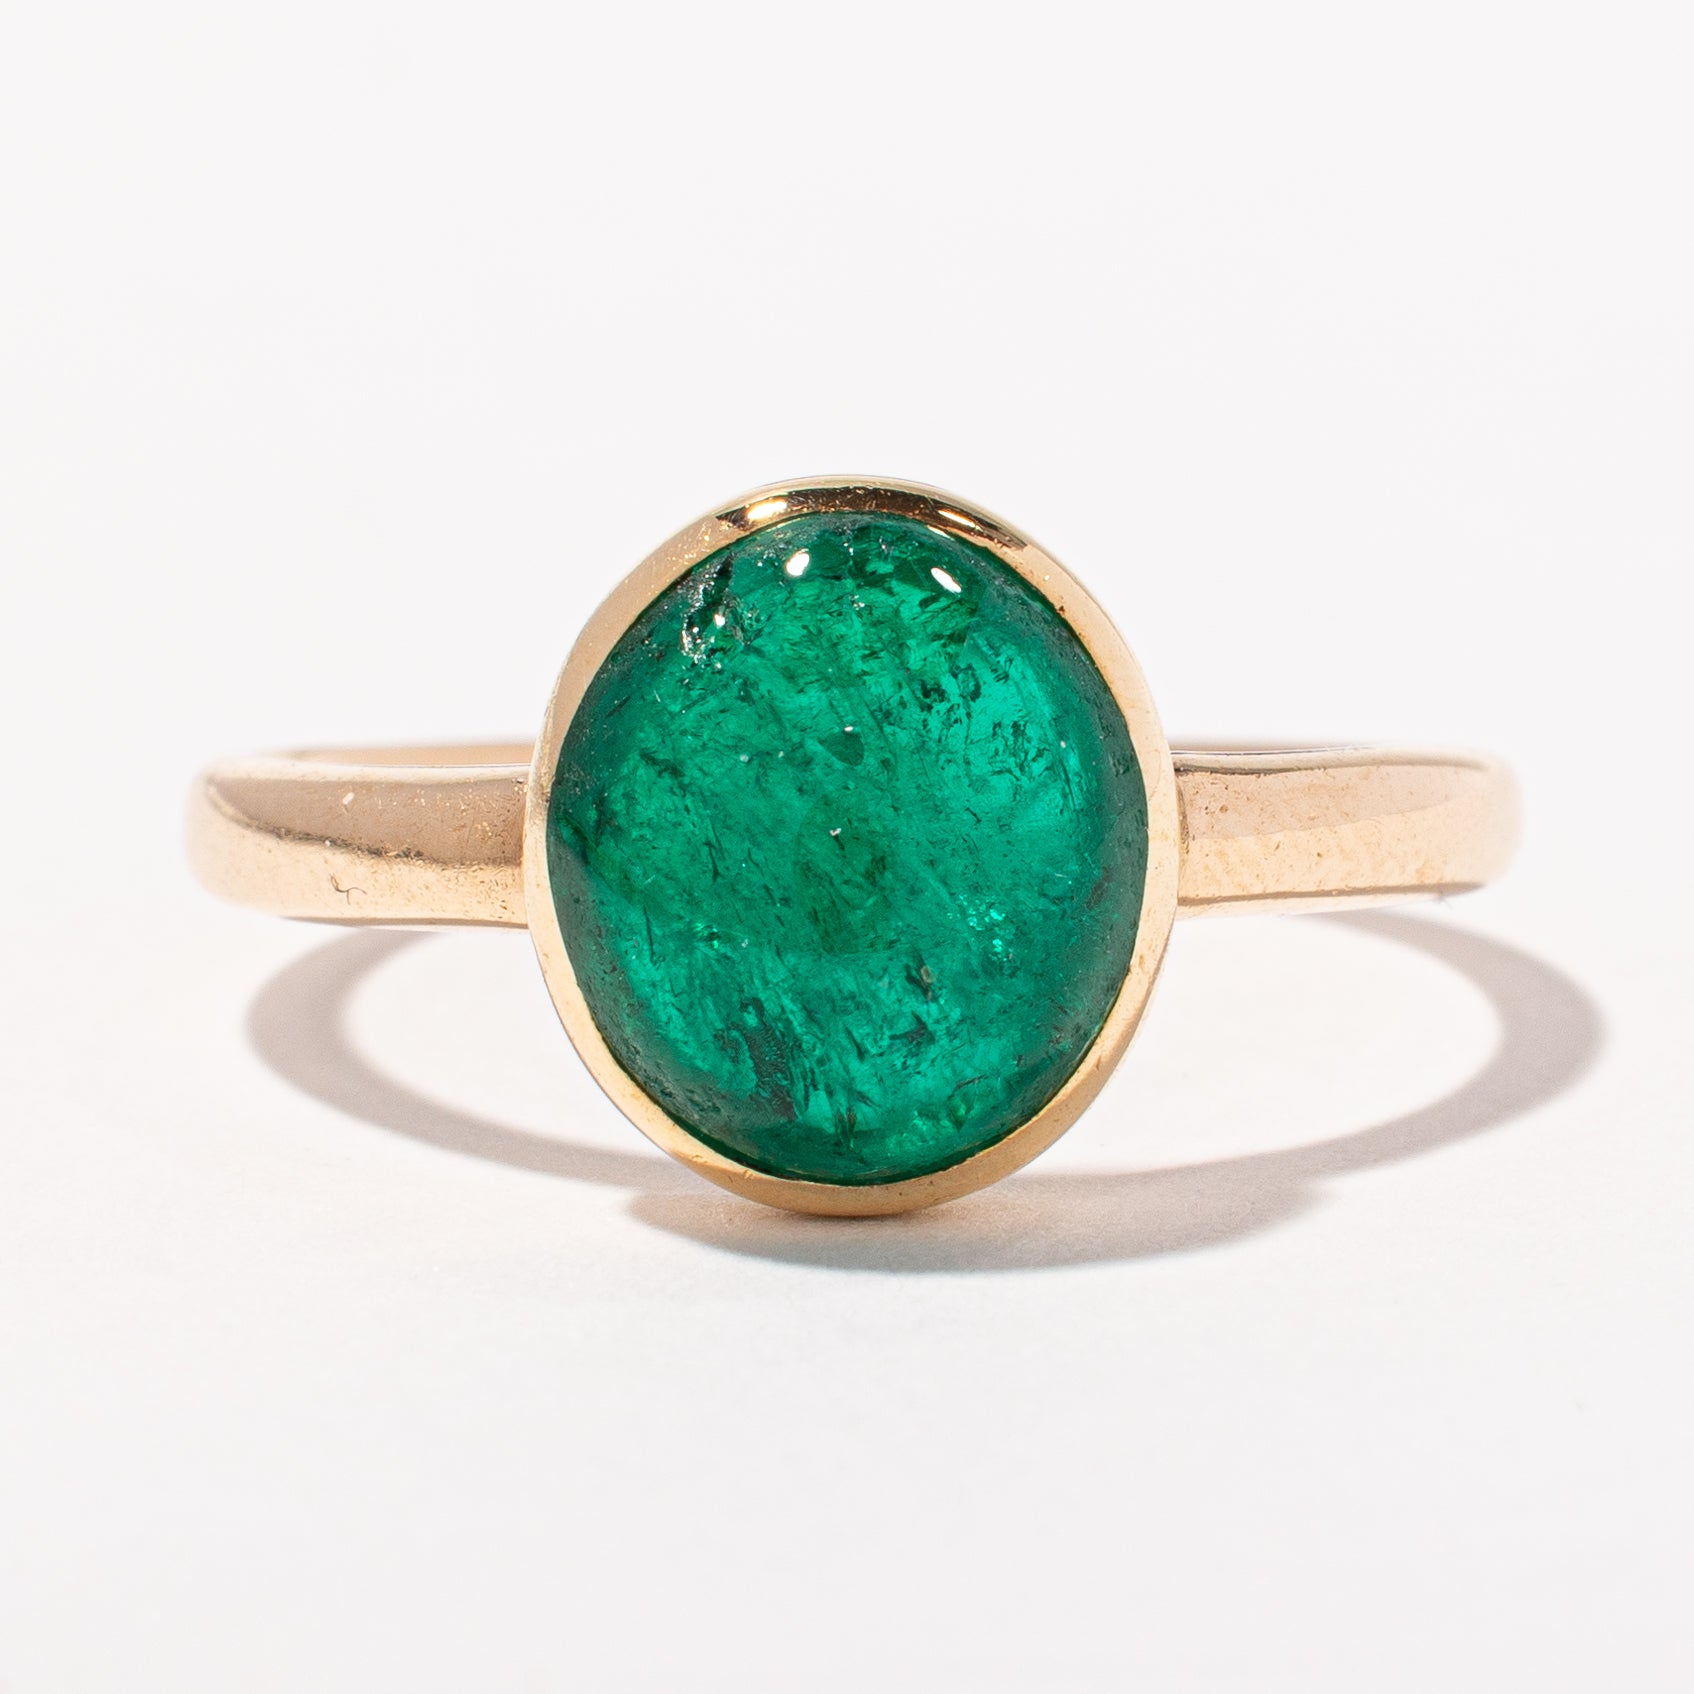 Cabochon Emerald Cocktail Ring | 4.20ct | SZ 8.25 |